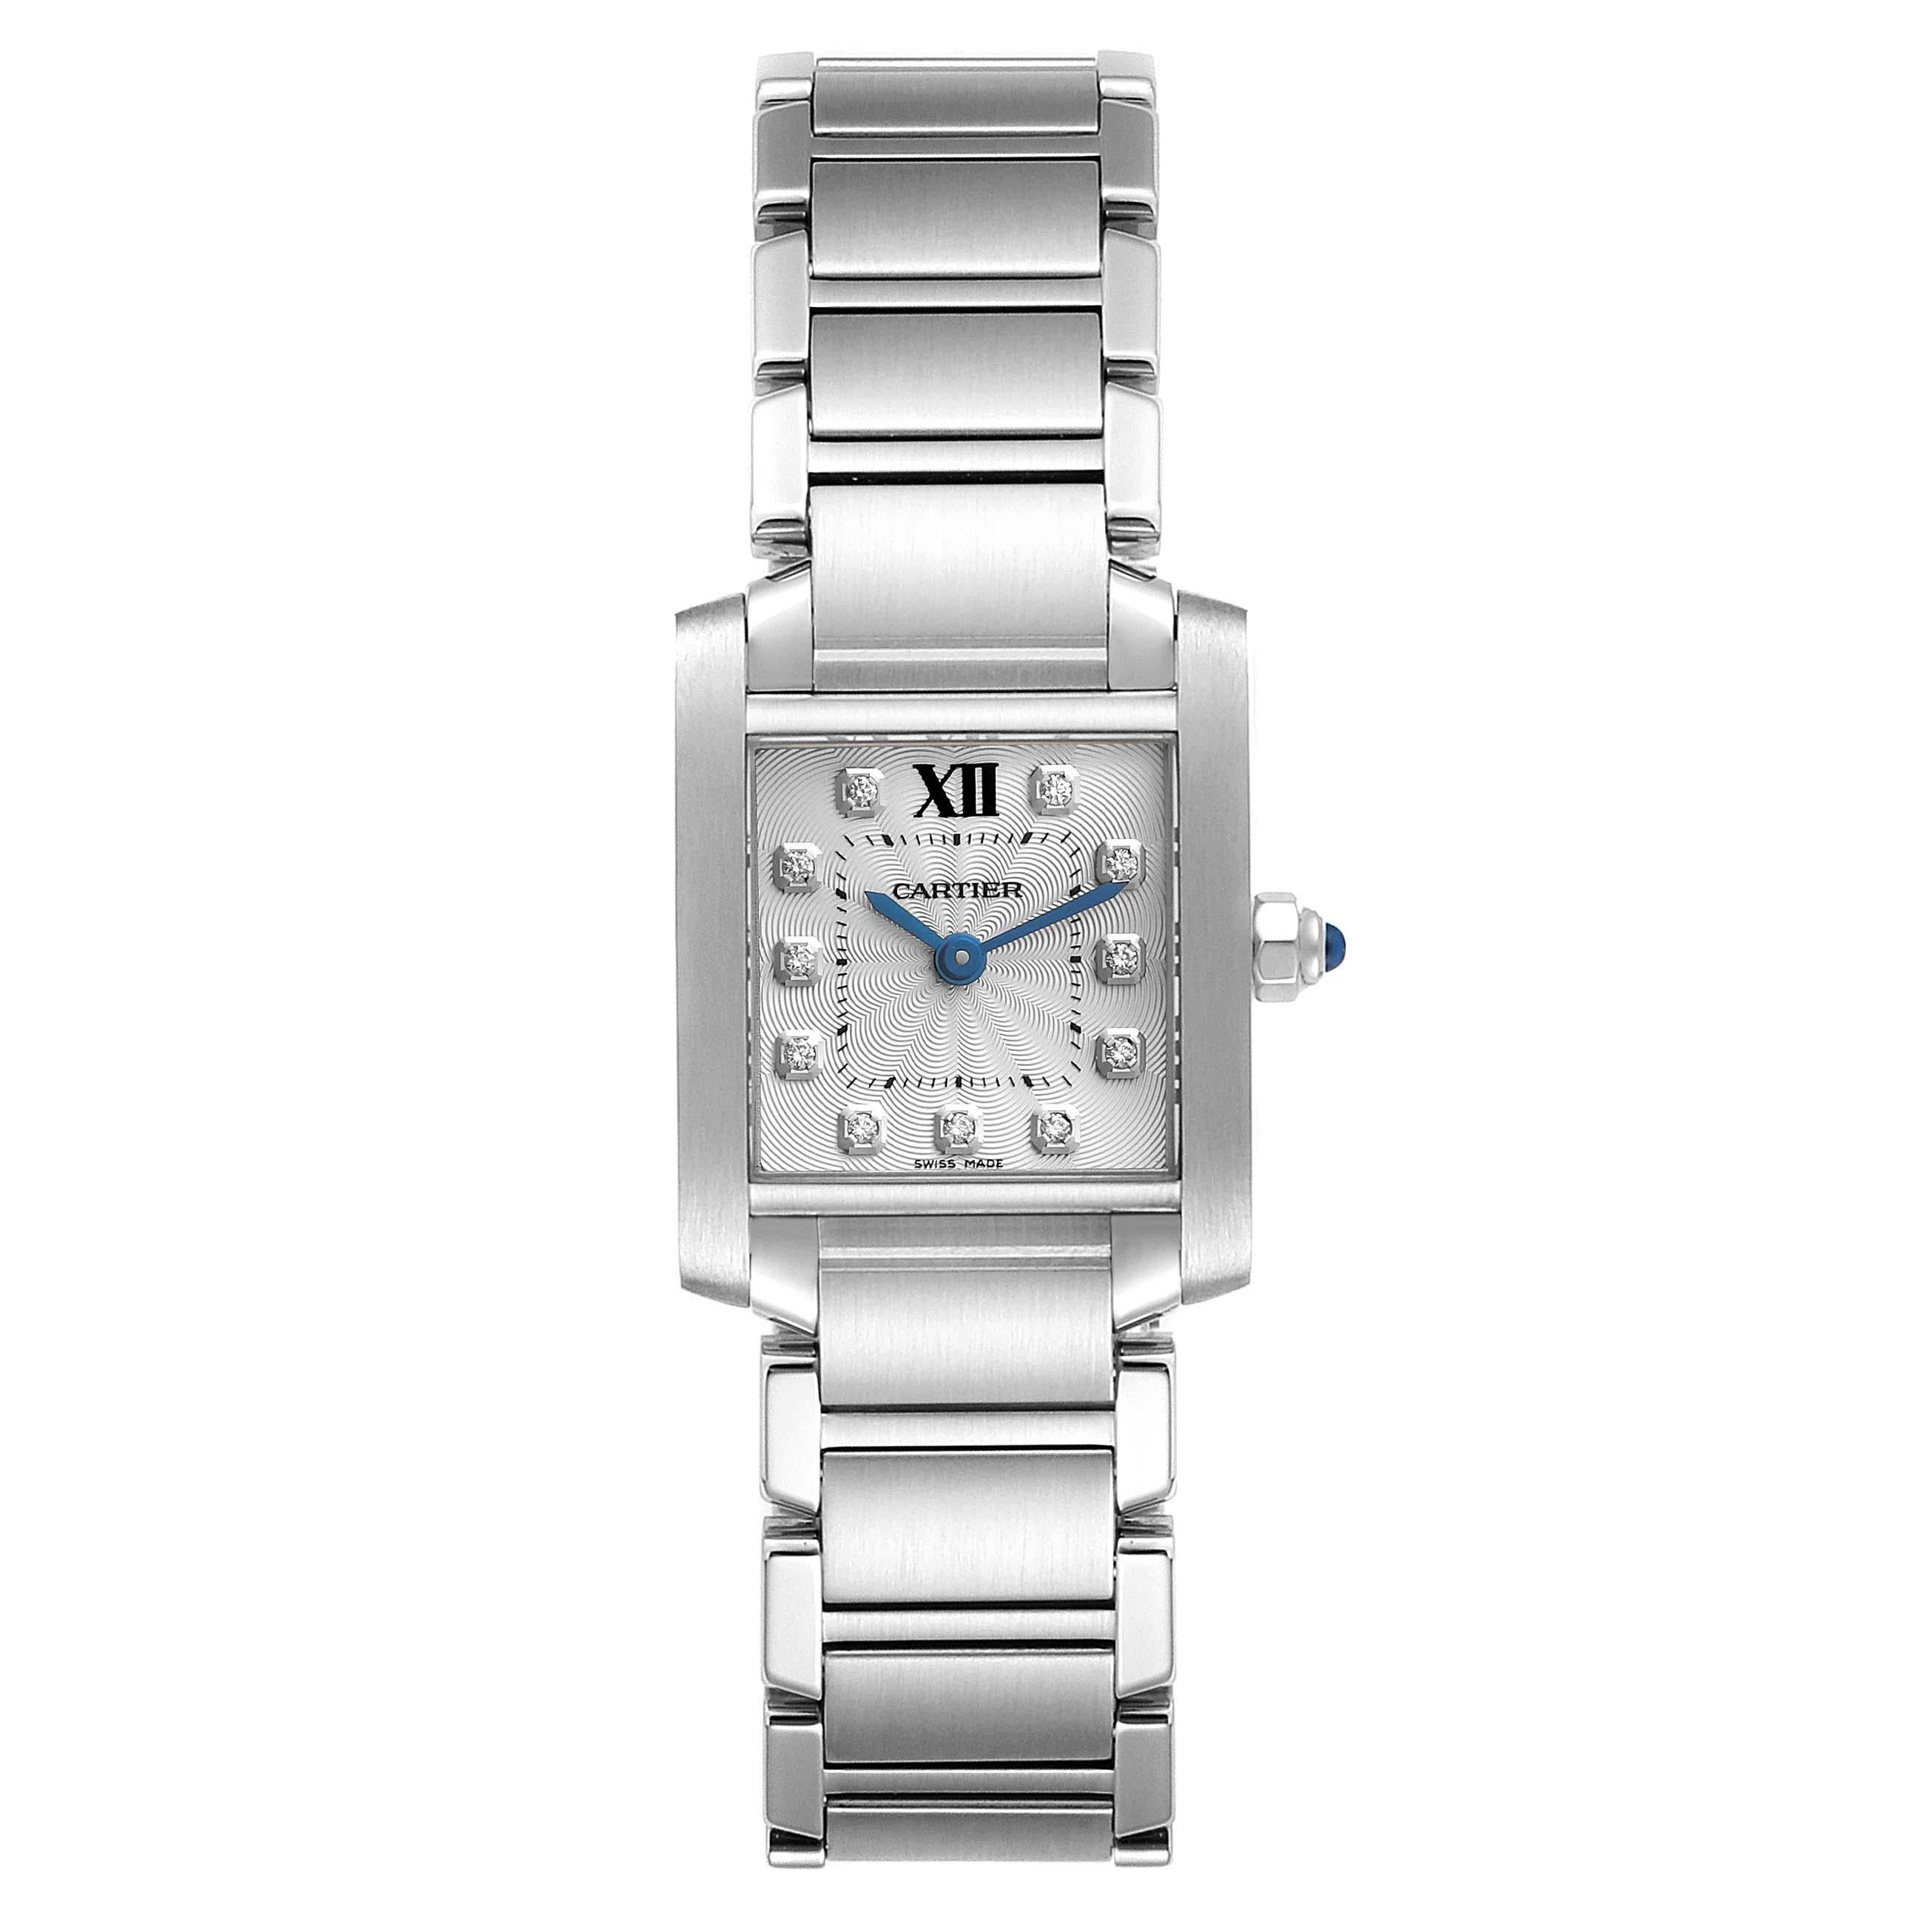 Cartier Tank Francaise Small Steel Diamond Dial Ladies Watch WE110006. Quartz movement. Rectangular stainless steel 20 x 25 mm case. Octagonal crown set with a blue spinel cabochon. . Scratch resistant sapphire crystal. Silver guilloche dial with